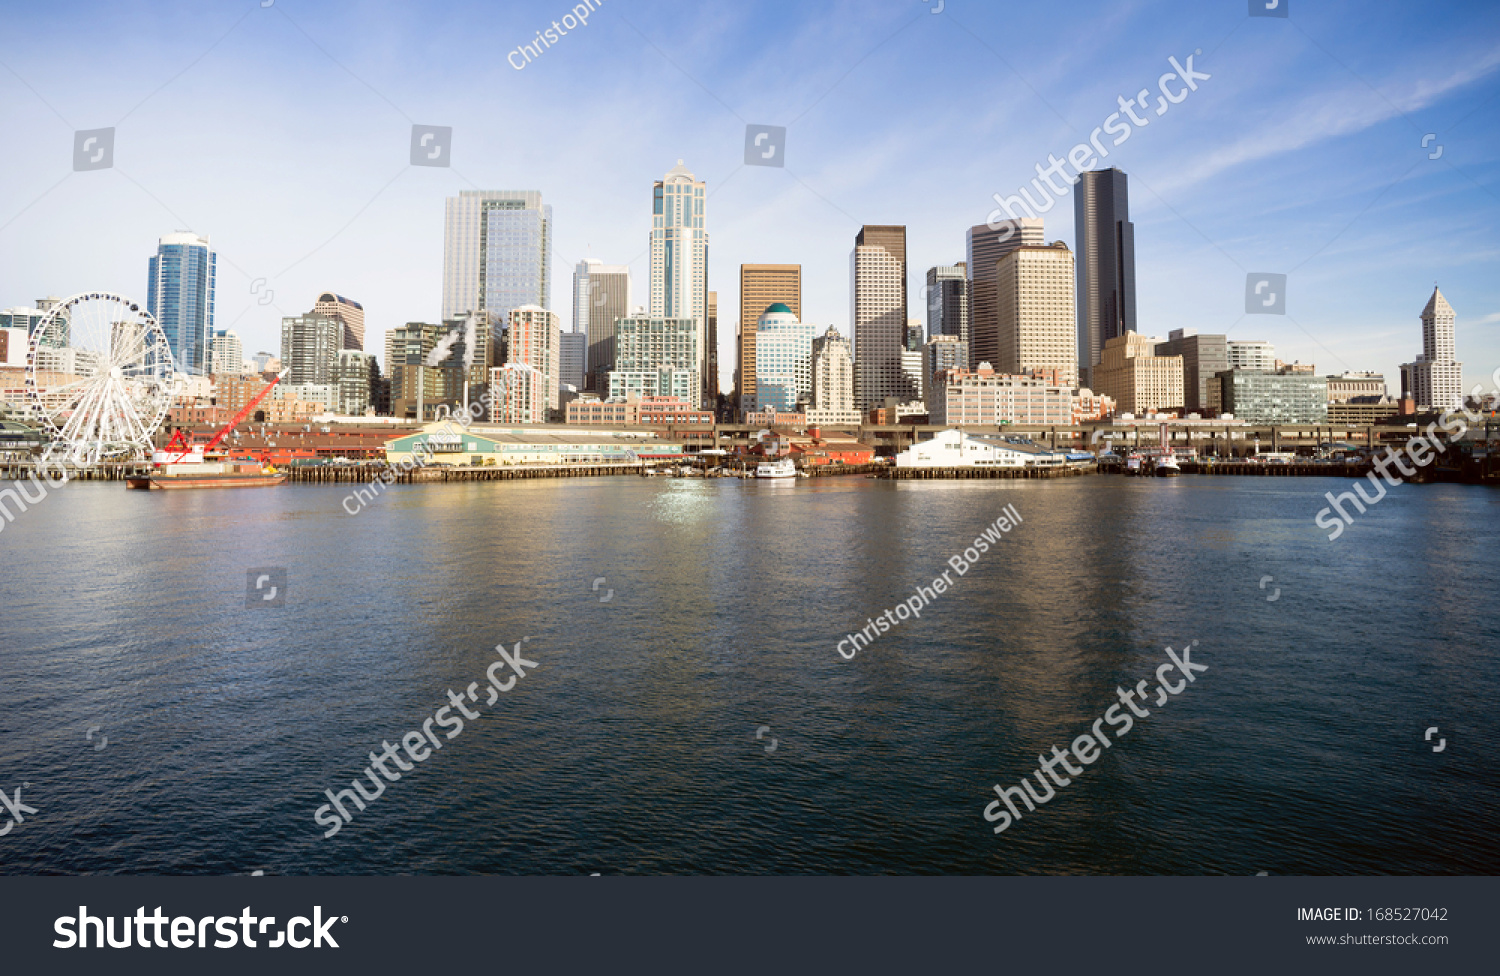 Infrastructure, Buildings, and waterfront attractions Elliott Bay Seattle Downtown Skyline #168527042